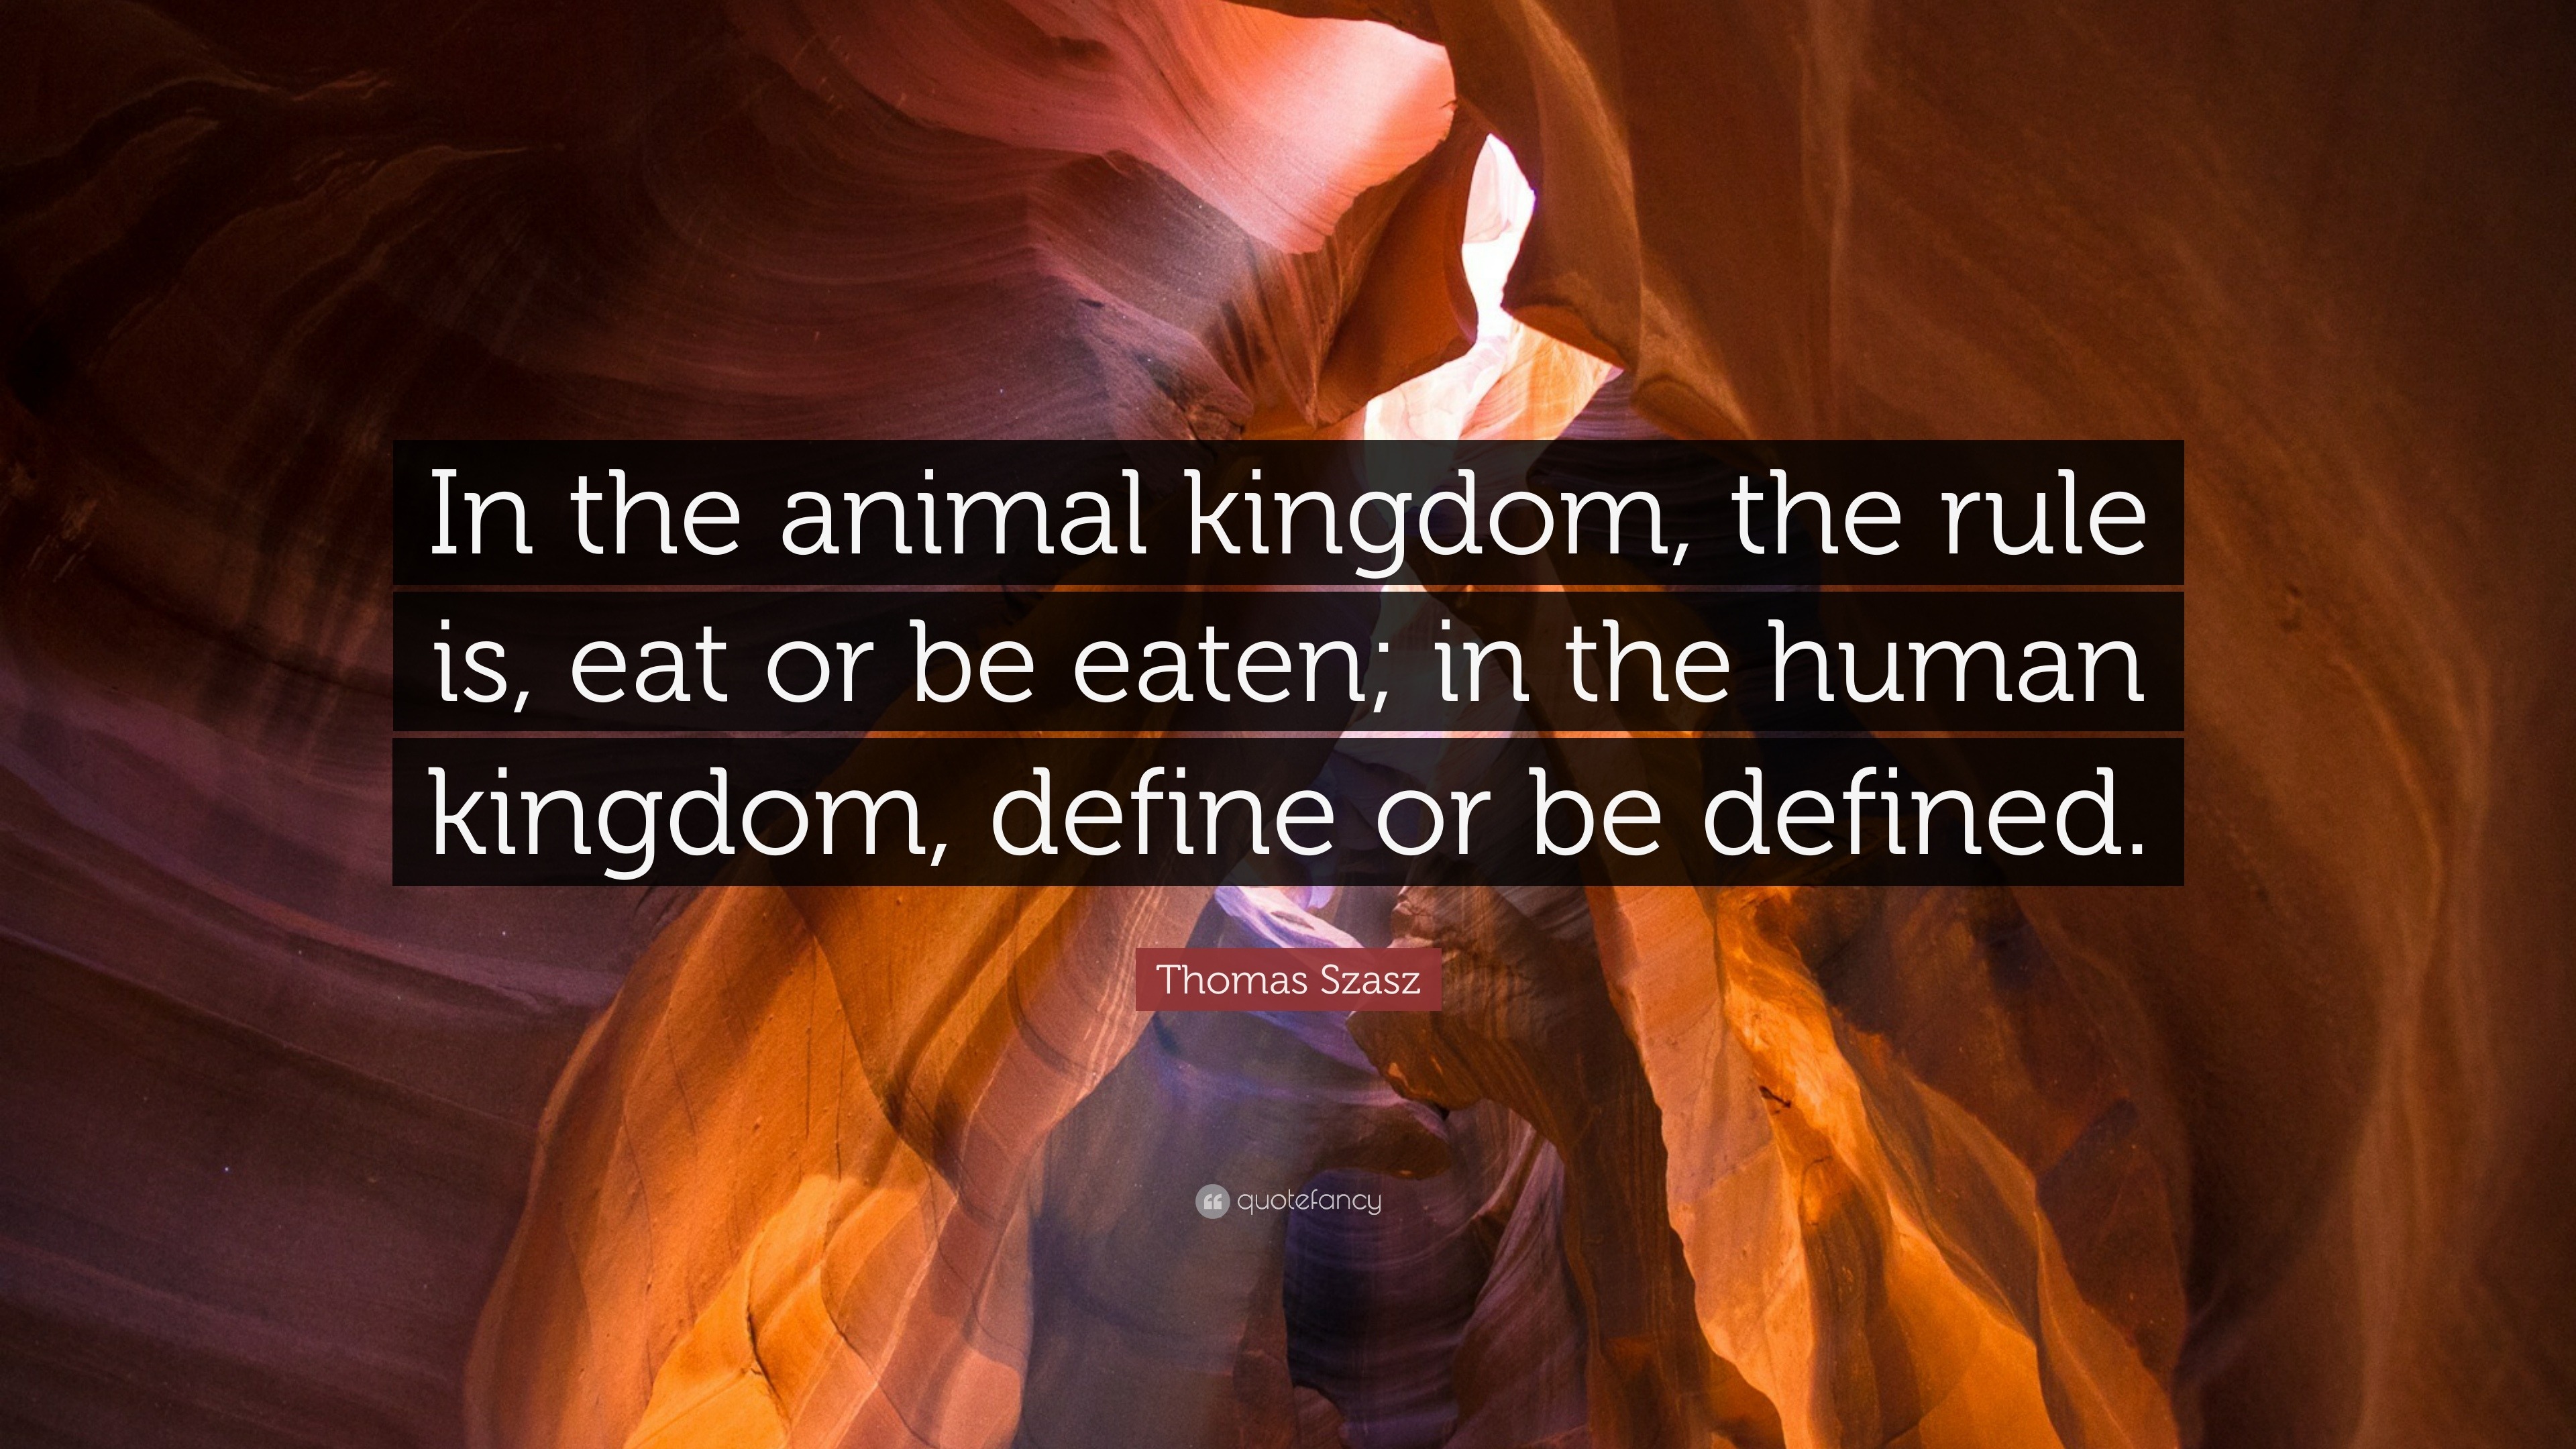 Thomas Szasz Quote: “In the animal kingdom, the rule is, eat or be eaten;  in the